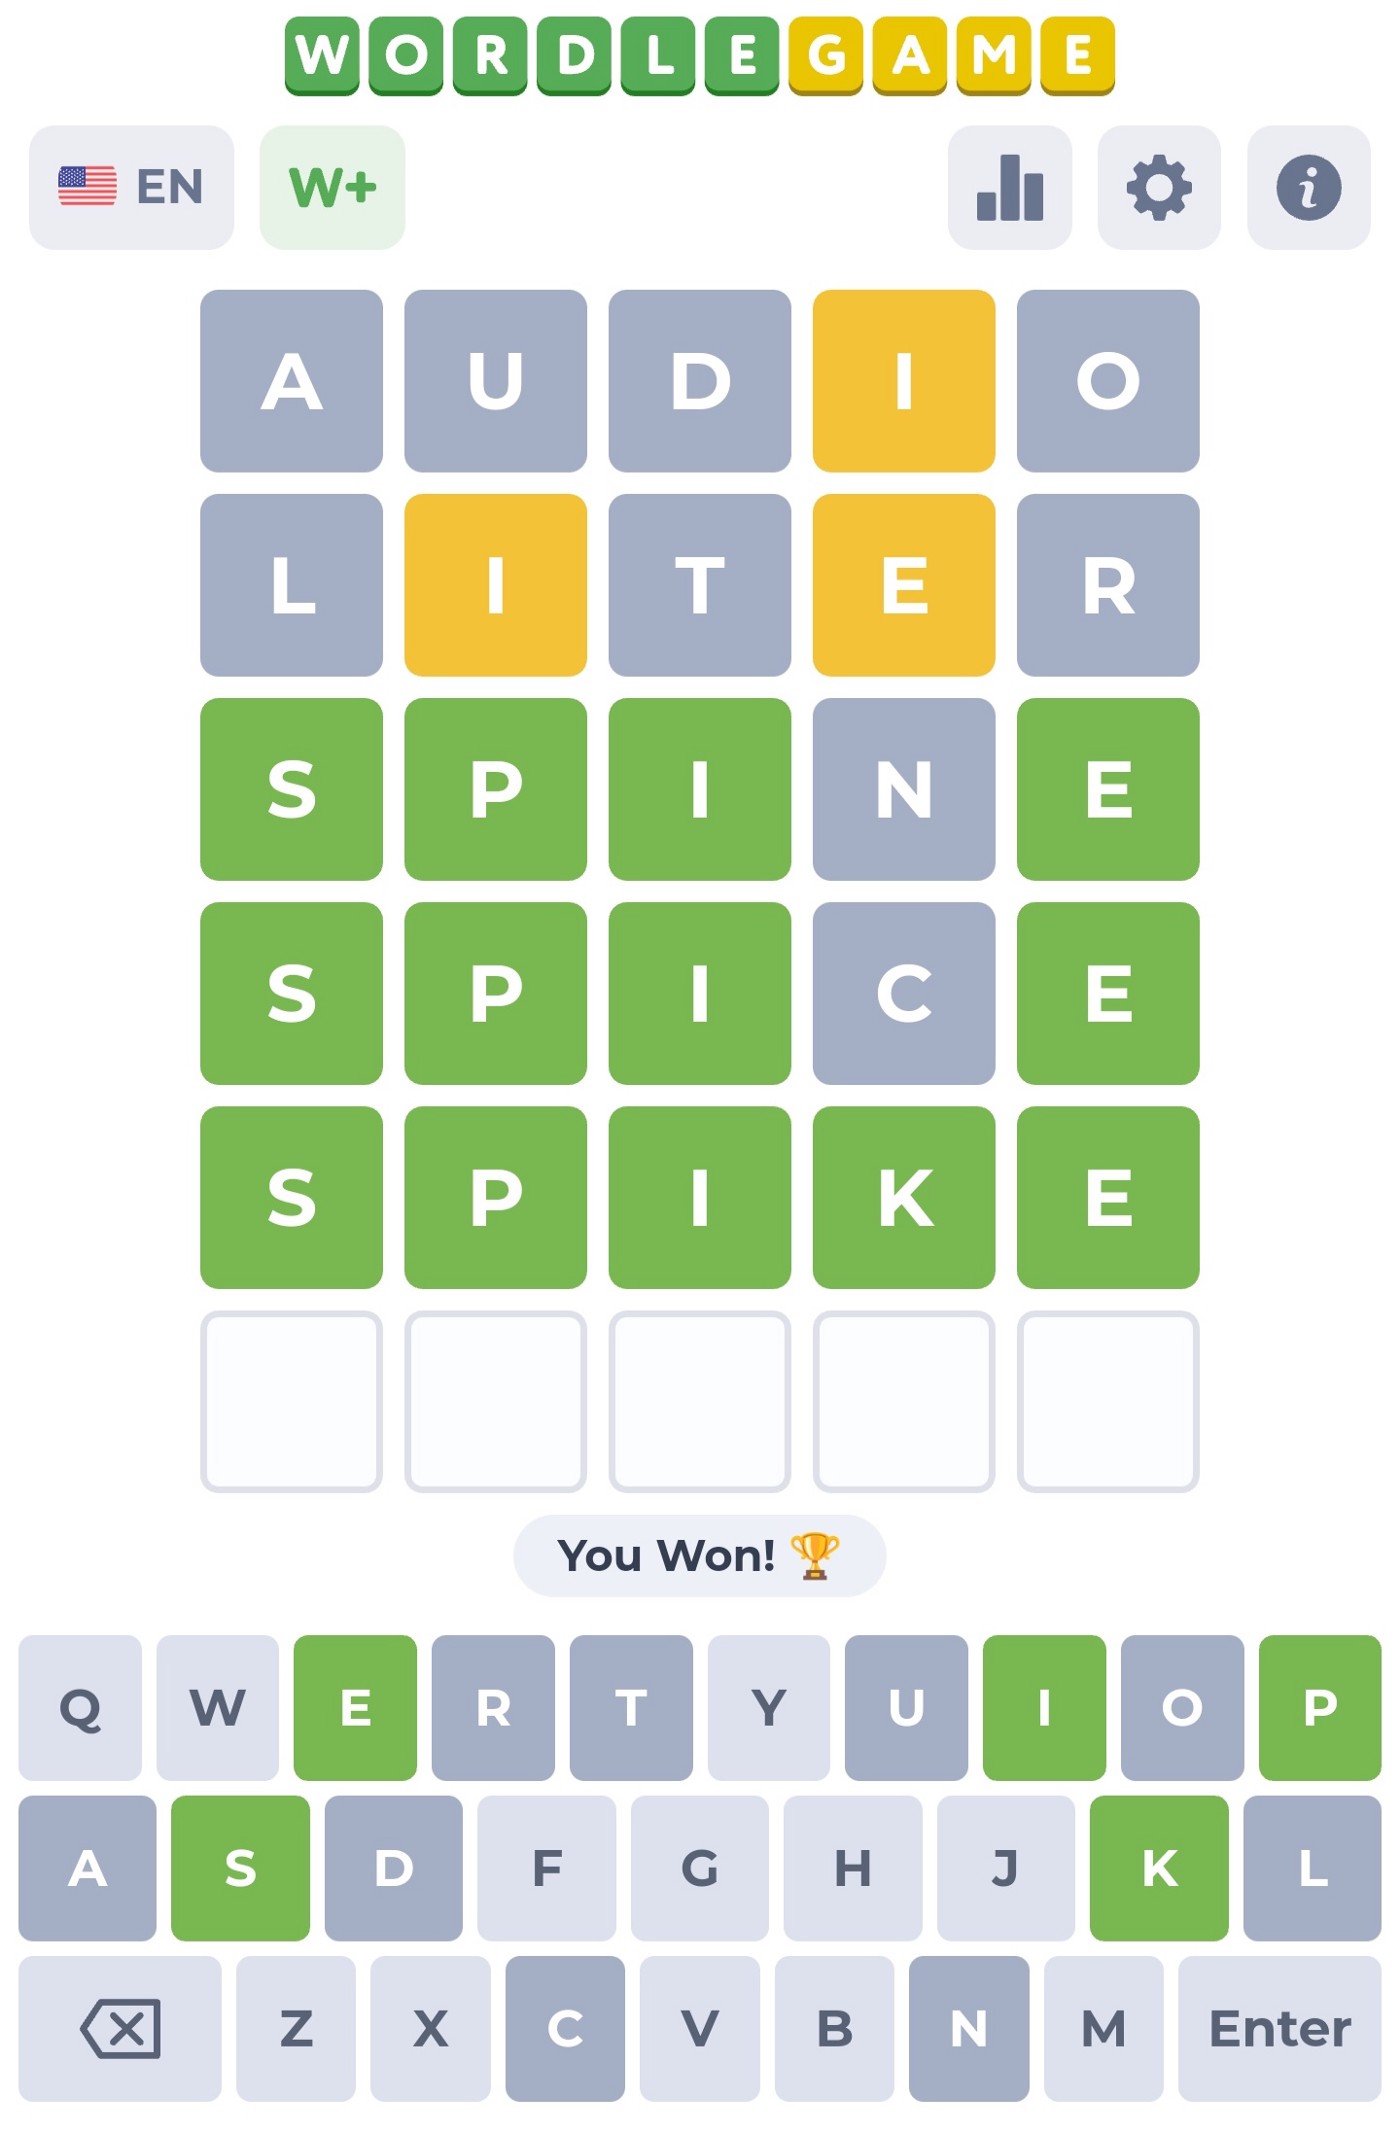 Screenshot of WordleGame with the words AUDIO (I in yellow), LITER (I and E in yellow), SPINE (S, P, I, and E in green), SPICE (S, P, I, and E in green), SPIKE (correct word)